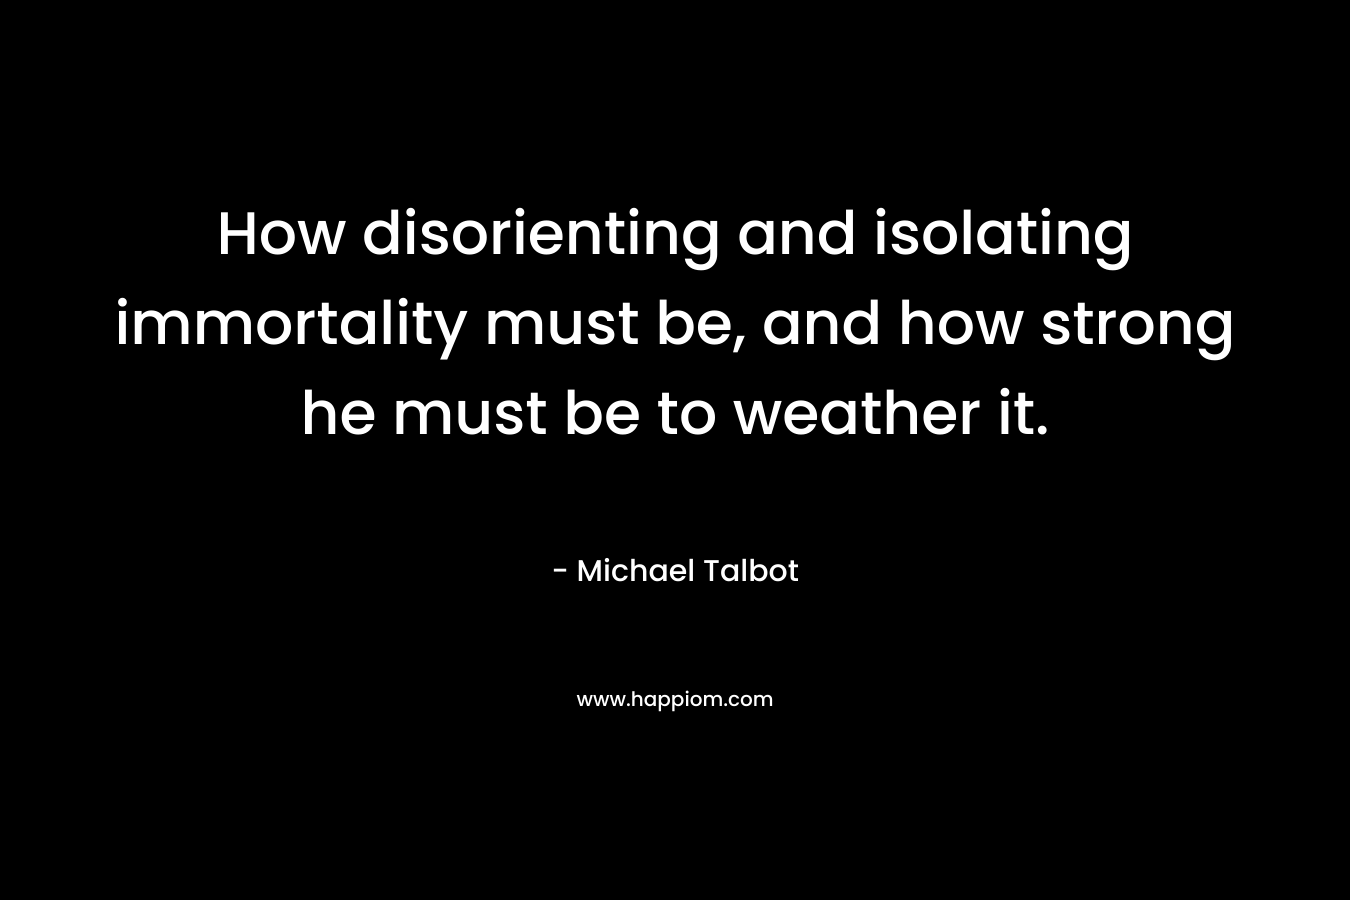 How disorienting and isolating immortality must be, and how strong he must be to weather it. – Michael Talbot